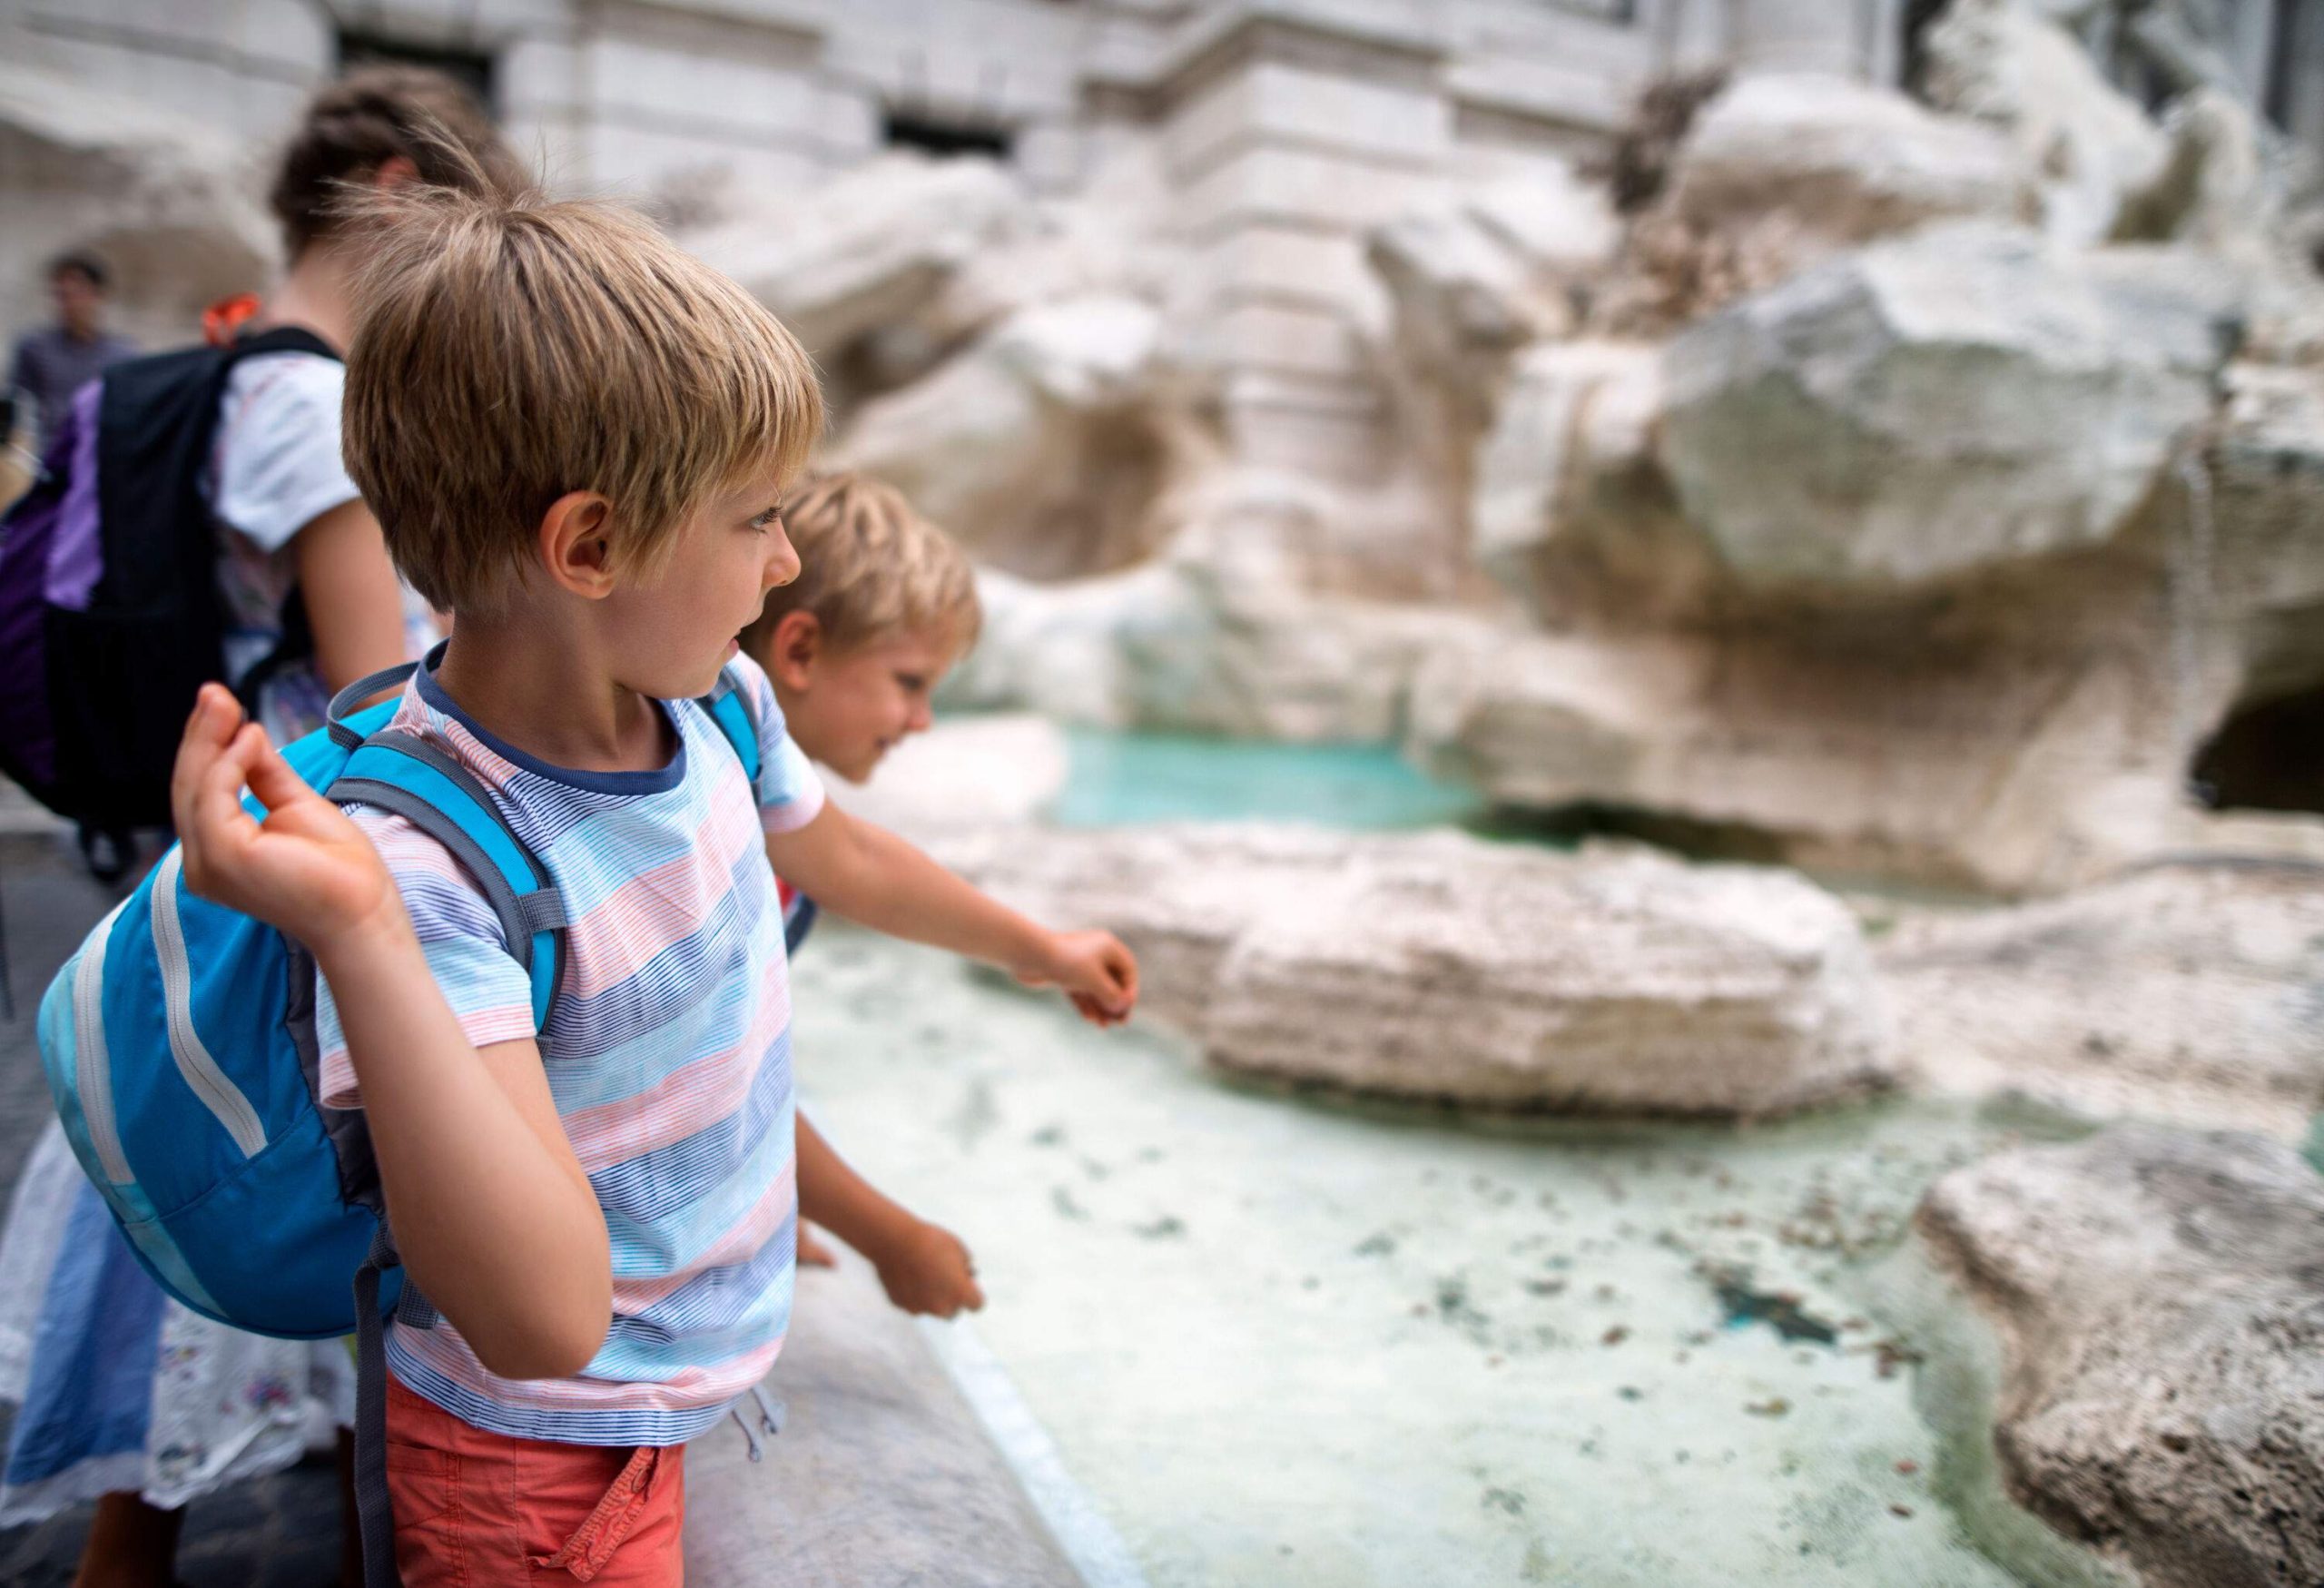 Excited kids throw coins onto the sparkling waters of the pond at the base of the Trevi Fountain.